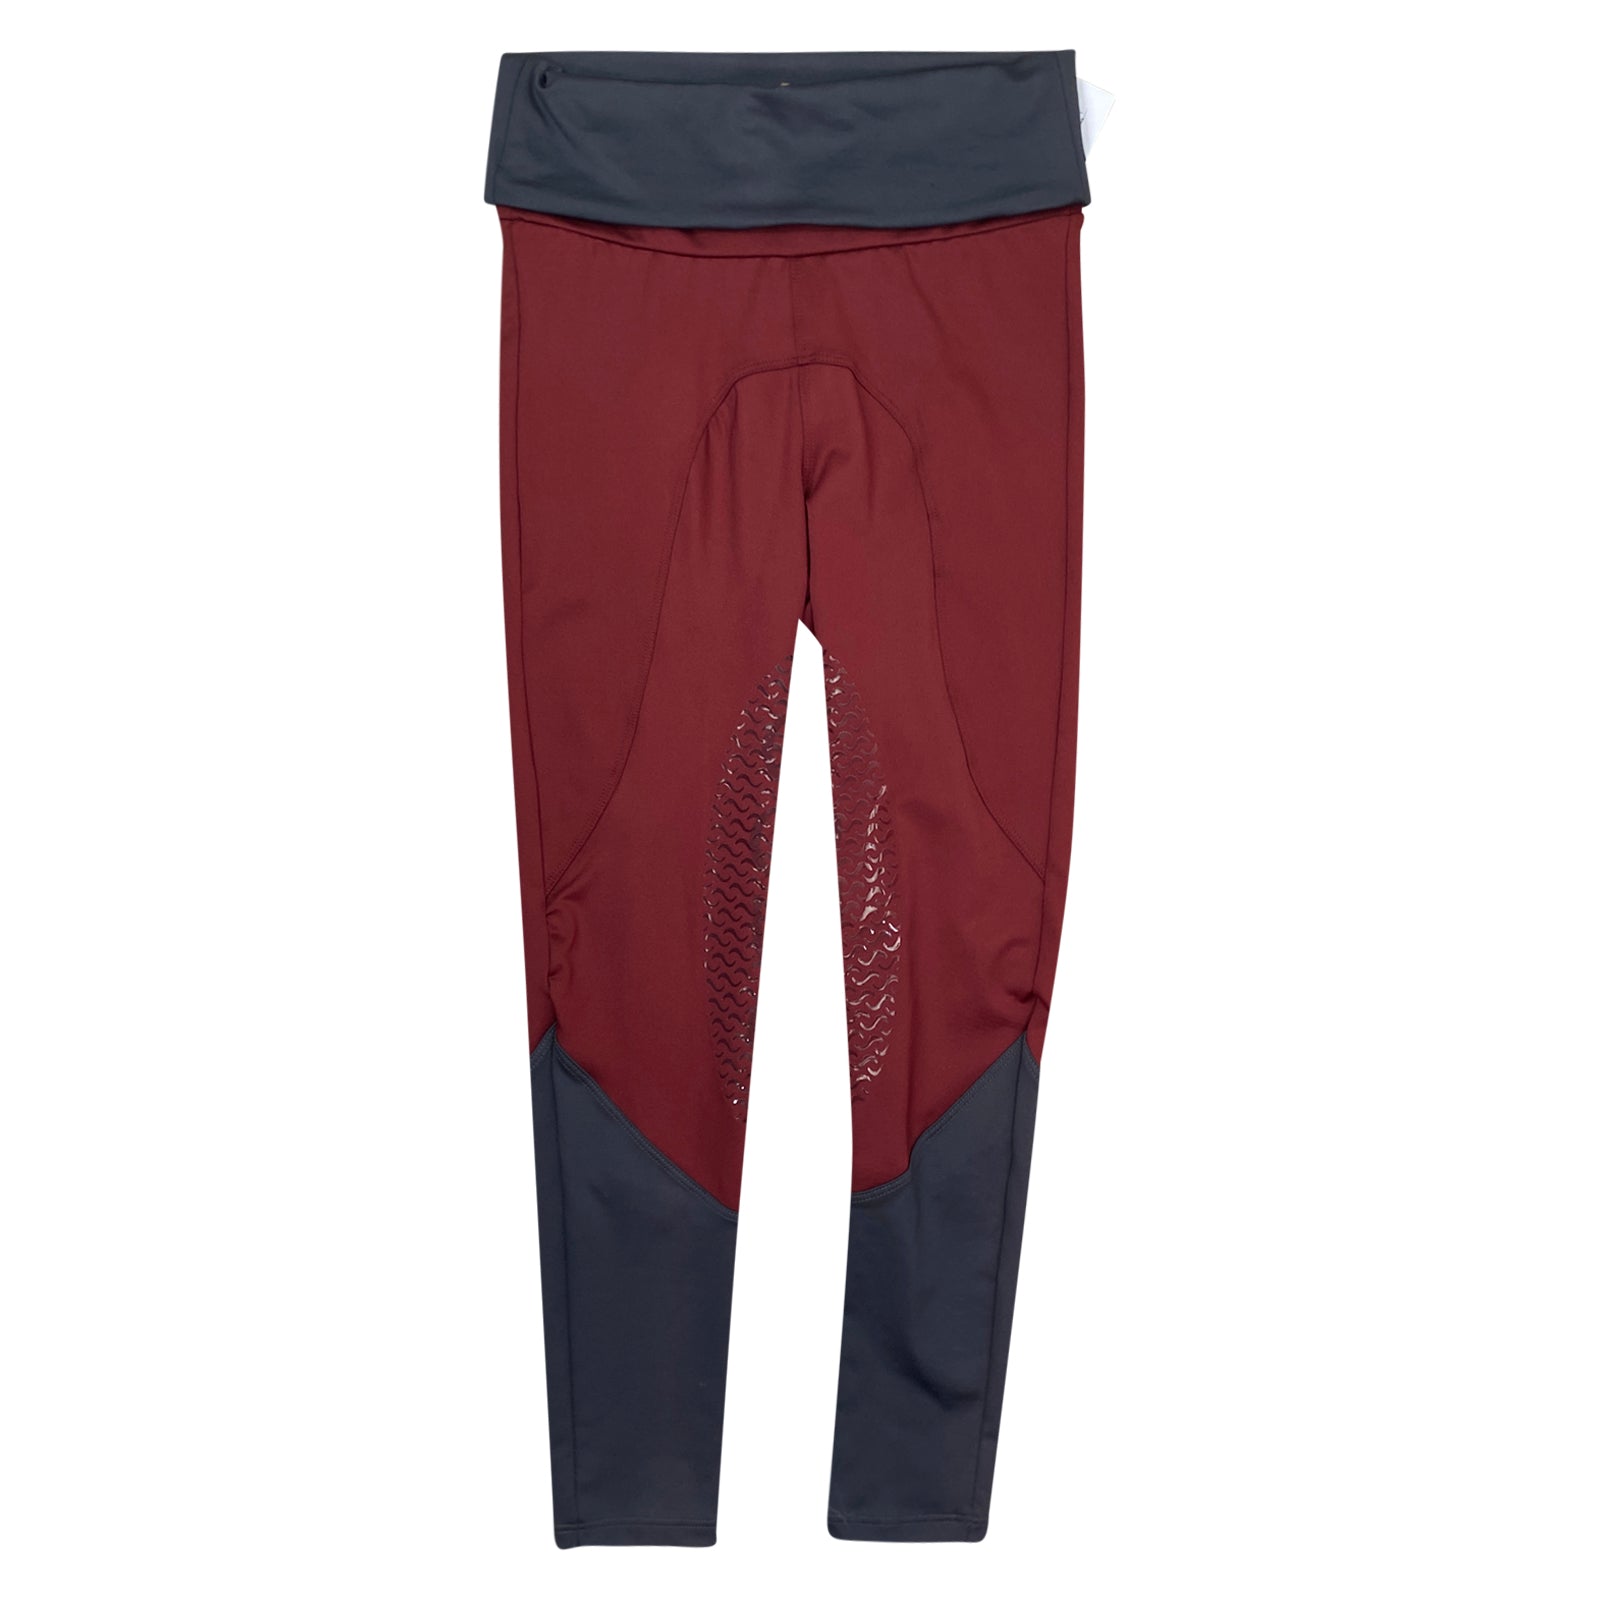 Front of Equo Schooling Pant in Burgundy/Grey 